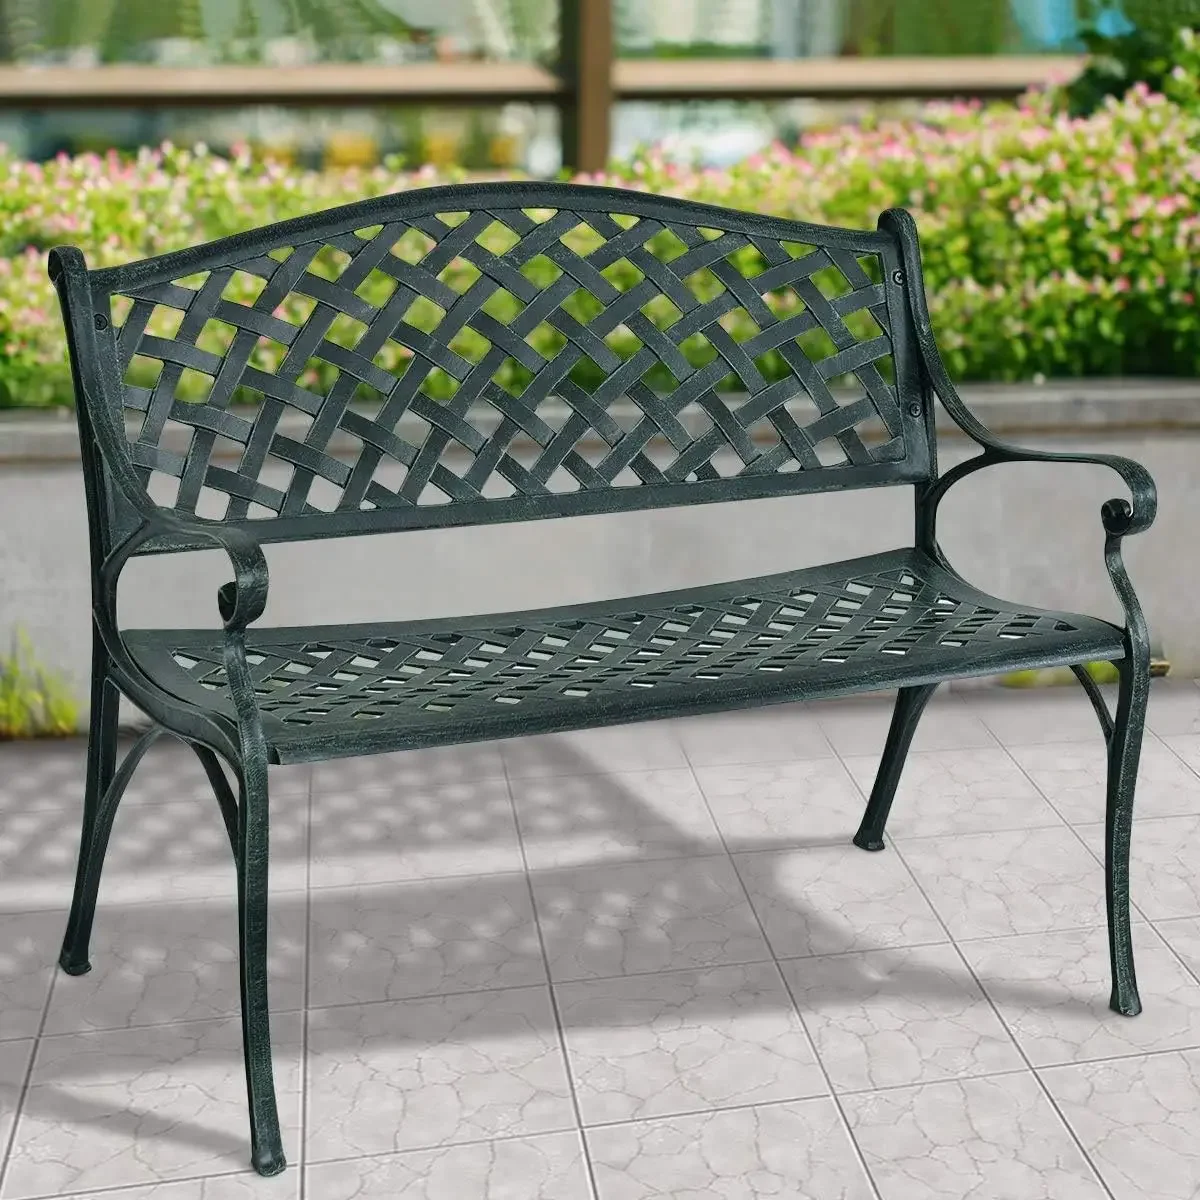 

Outdoor Bench, Garden Bench with Aluminum Frame Seats, 600 Lbs Weight Capacity, Park Bench for Porch, Yard, Patio Bench